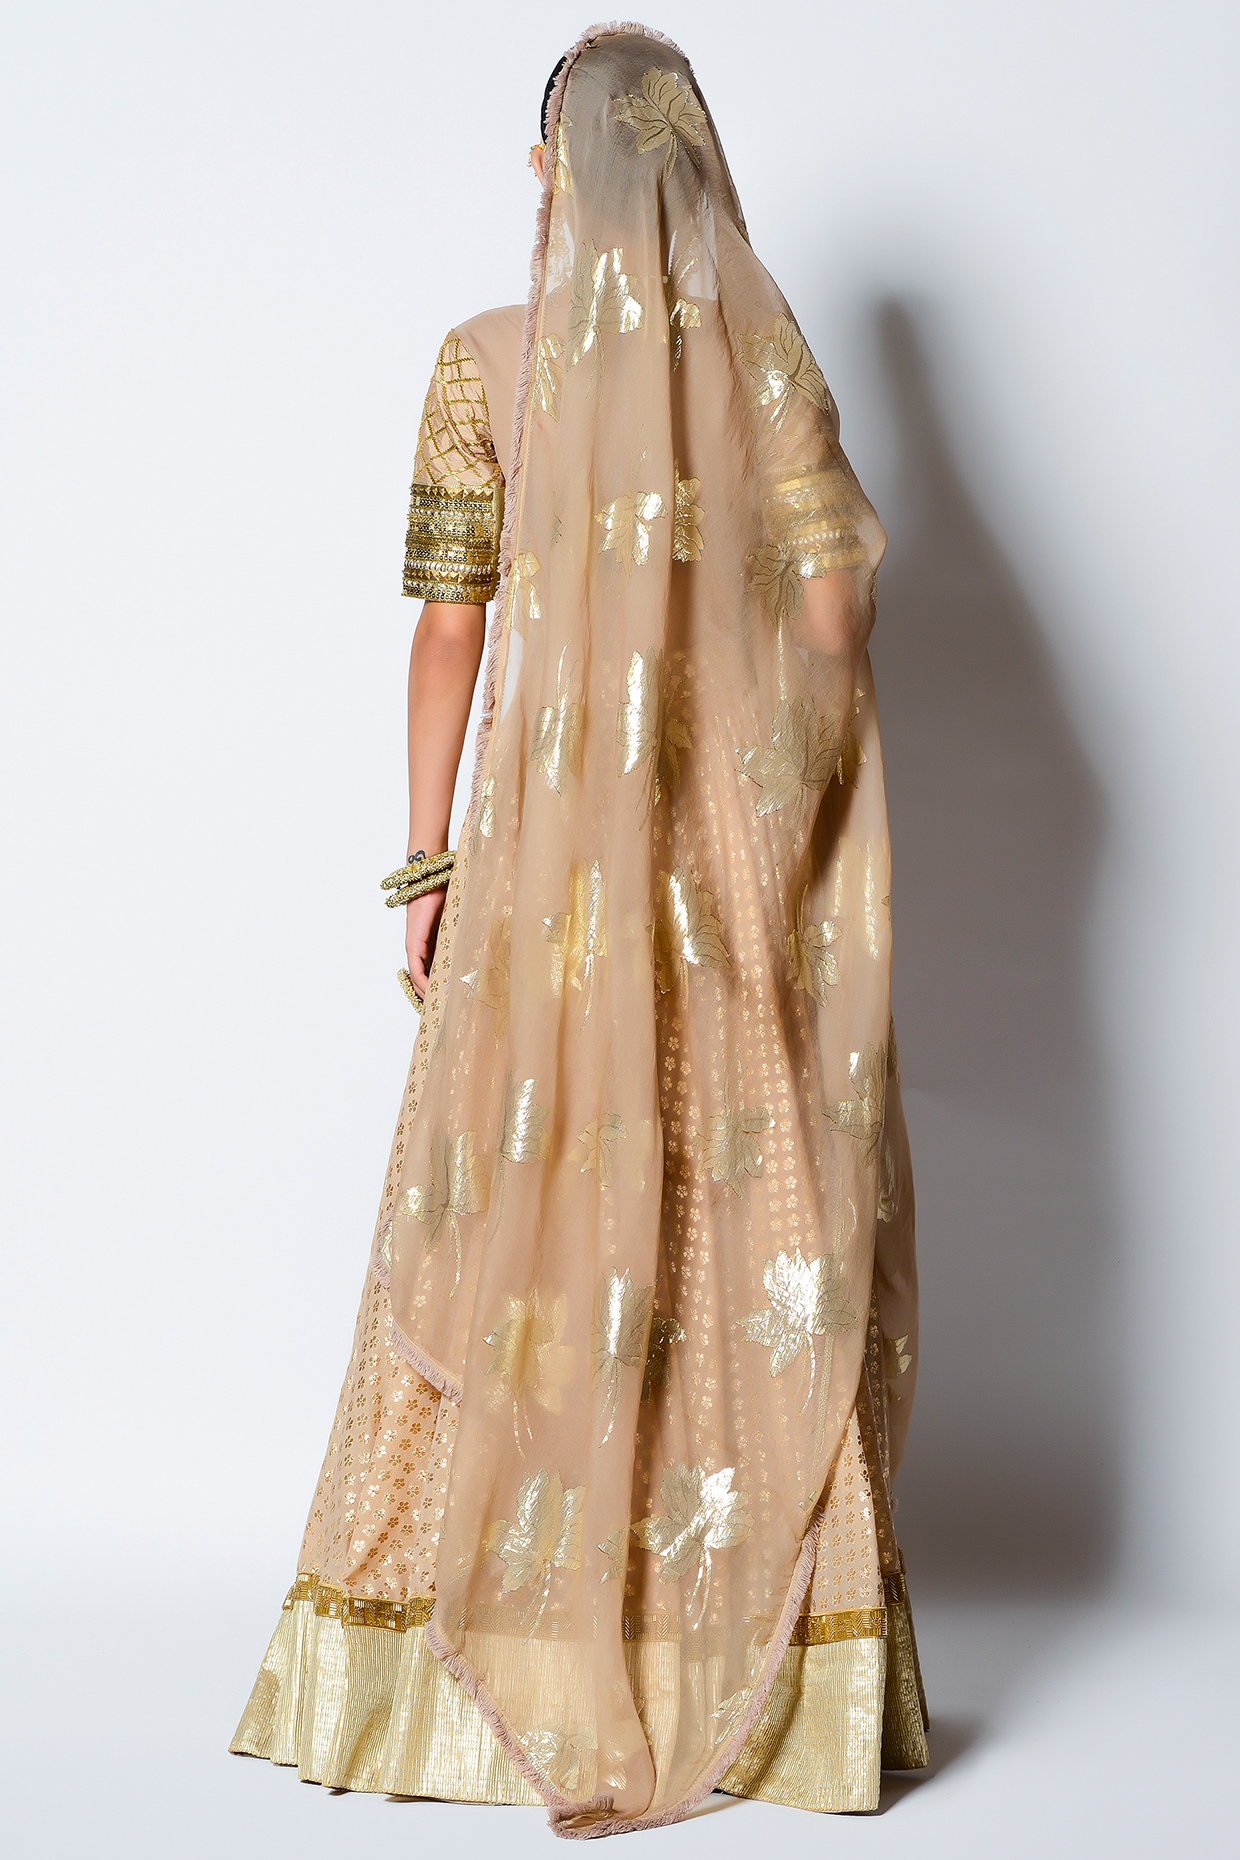 Golden Embroidered Semi Stitched Lehenga with Dupatta